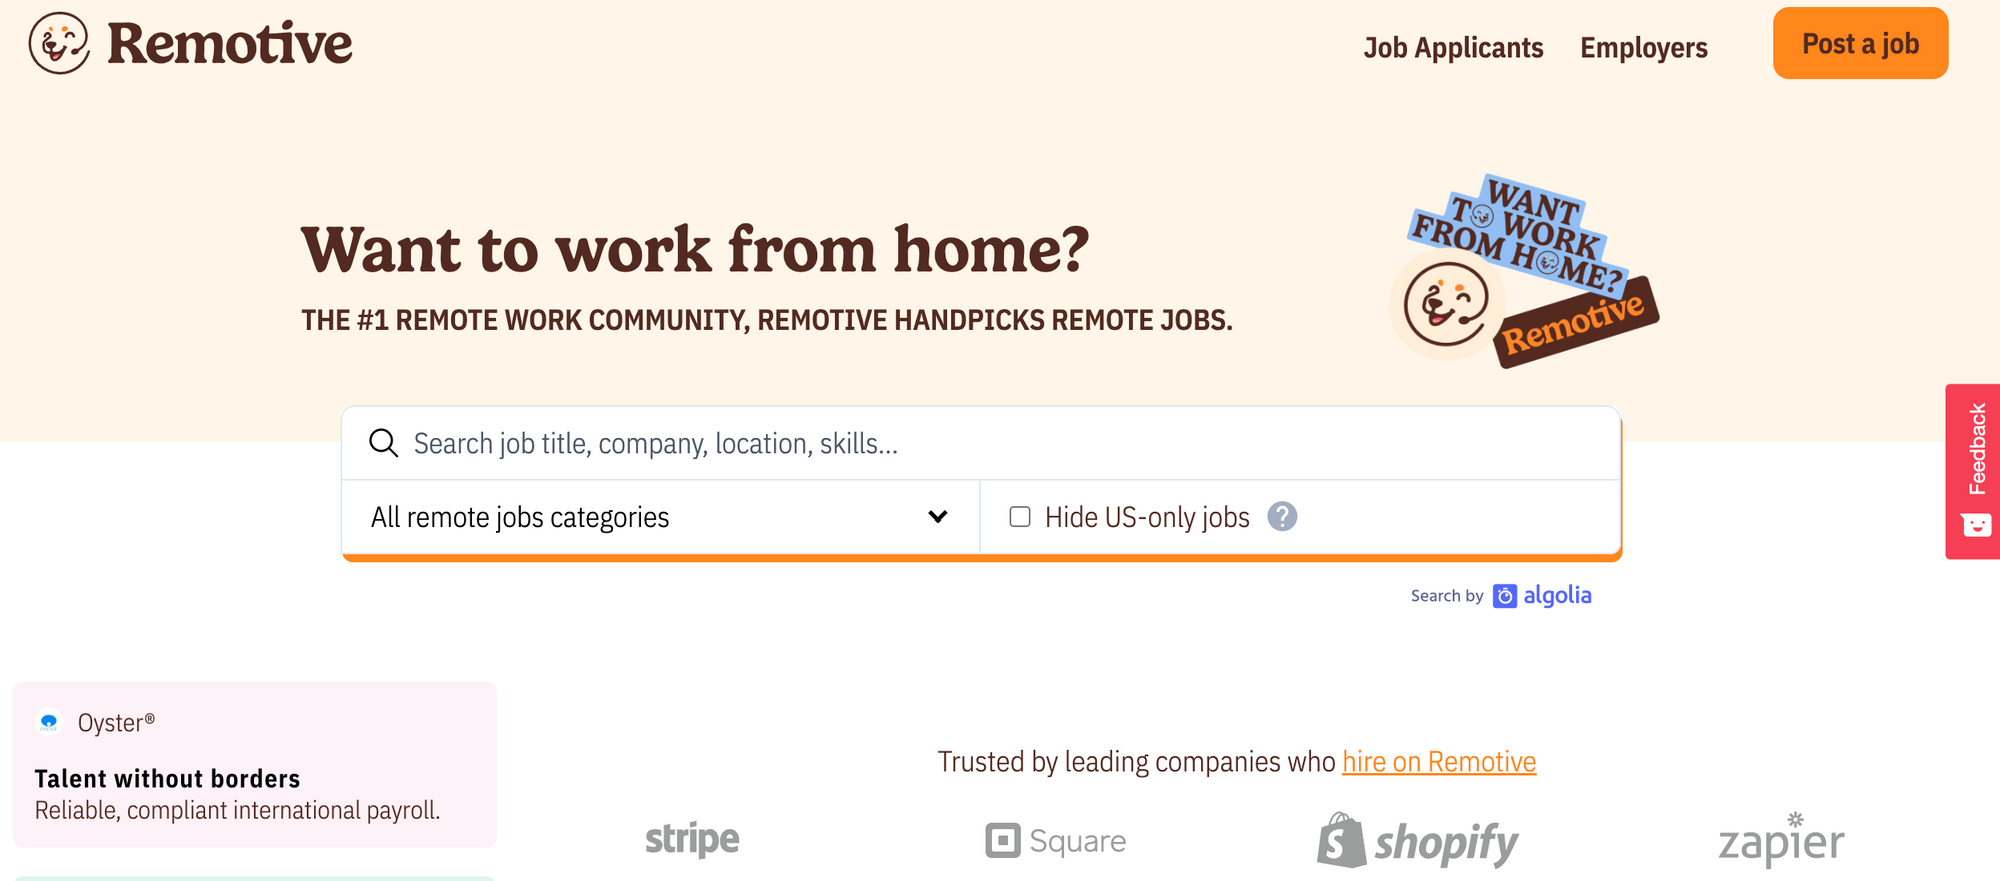 Remotive, one of the top freelance websites